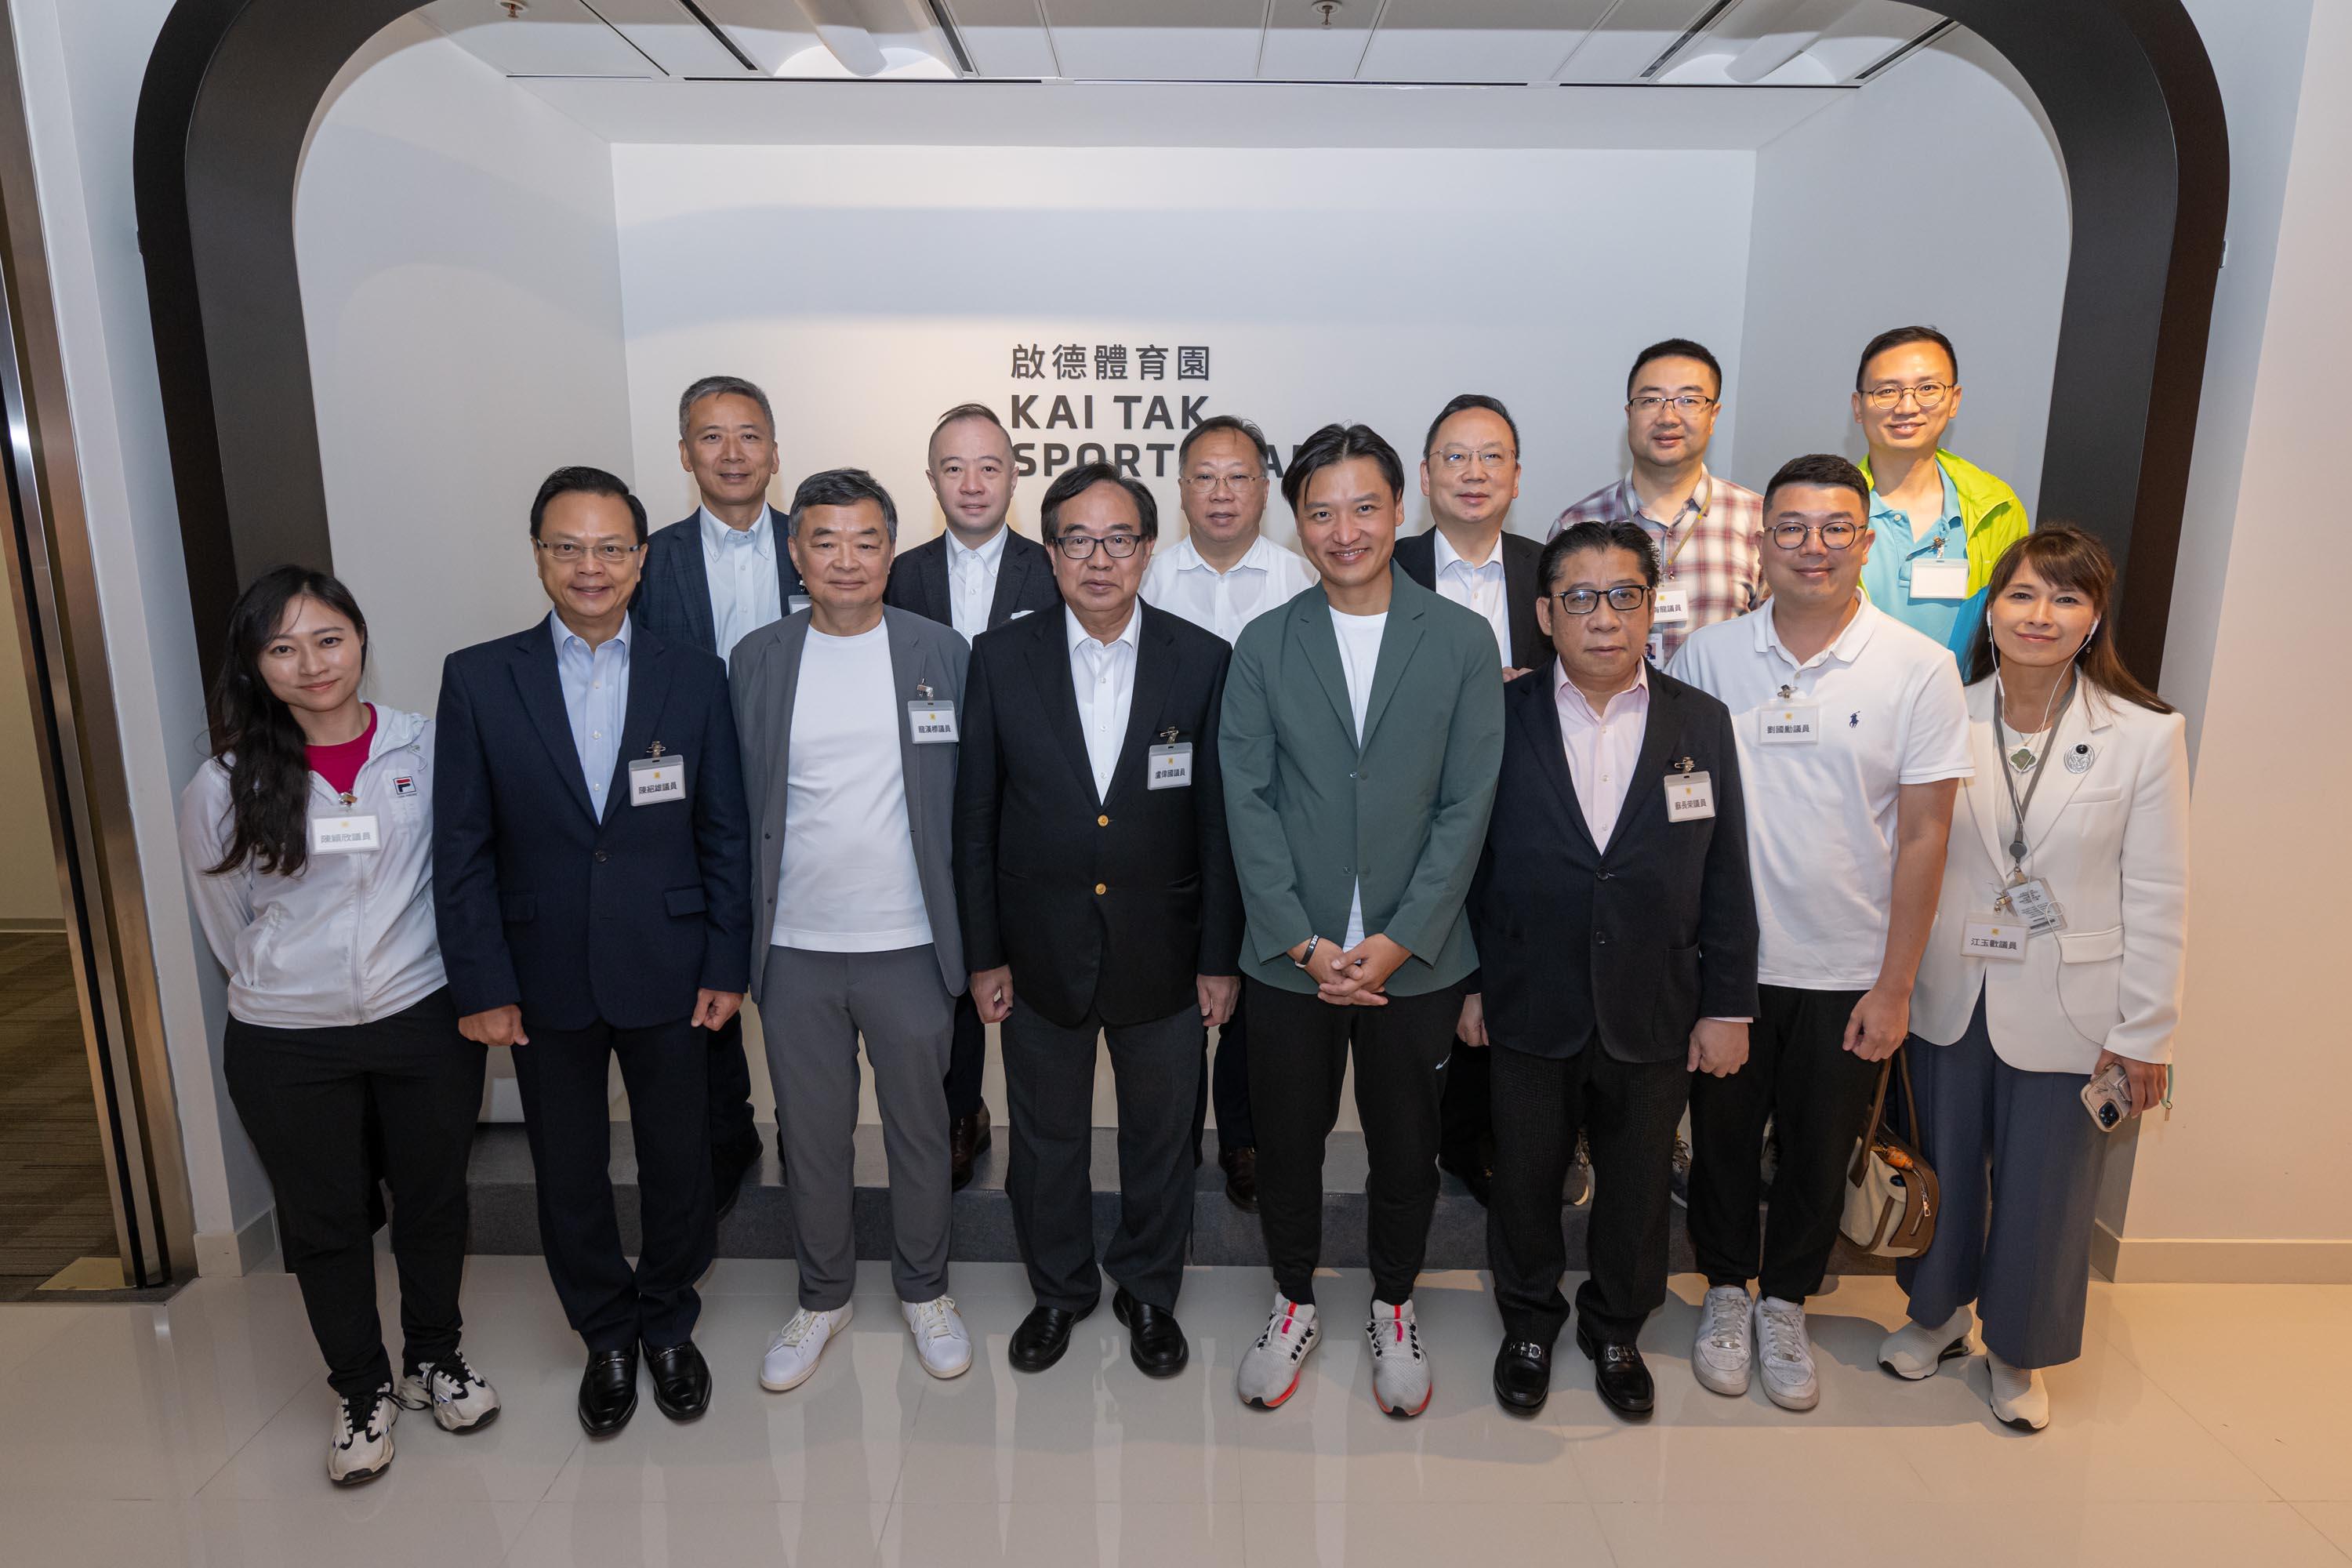 The Legislative Council (LegCo) Panel on Home Affairs, Culture and Sports and Public Works Subcommittee conducted a joint visit to the Kai Tak Sports Park (KTSP) today (October 17). Photo shows the Chairman of the Panel on Home Affairs, Culture and Sports, Mr Vincent Cheng (front row, fourth right), the Deputy Chairman of the Panel, Ms Joephy Chan (front row, first left), and the Chairman of the Public Works Subcommittee, Mr Lo Wai-kwok (front row, fourth left), and other Legco Members at the KTSP Experience Centre.
